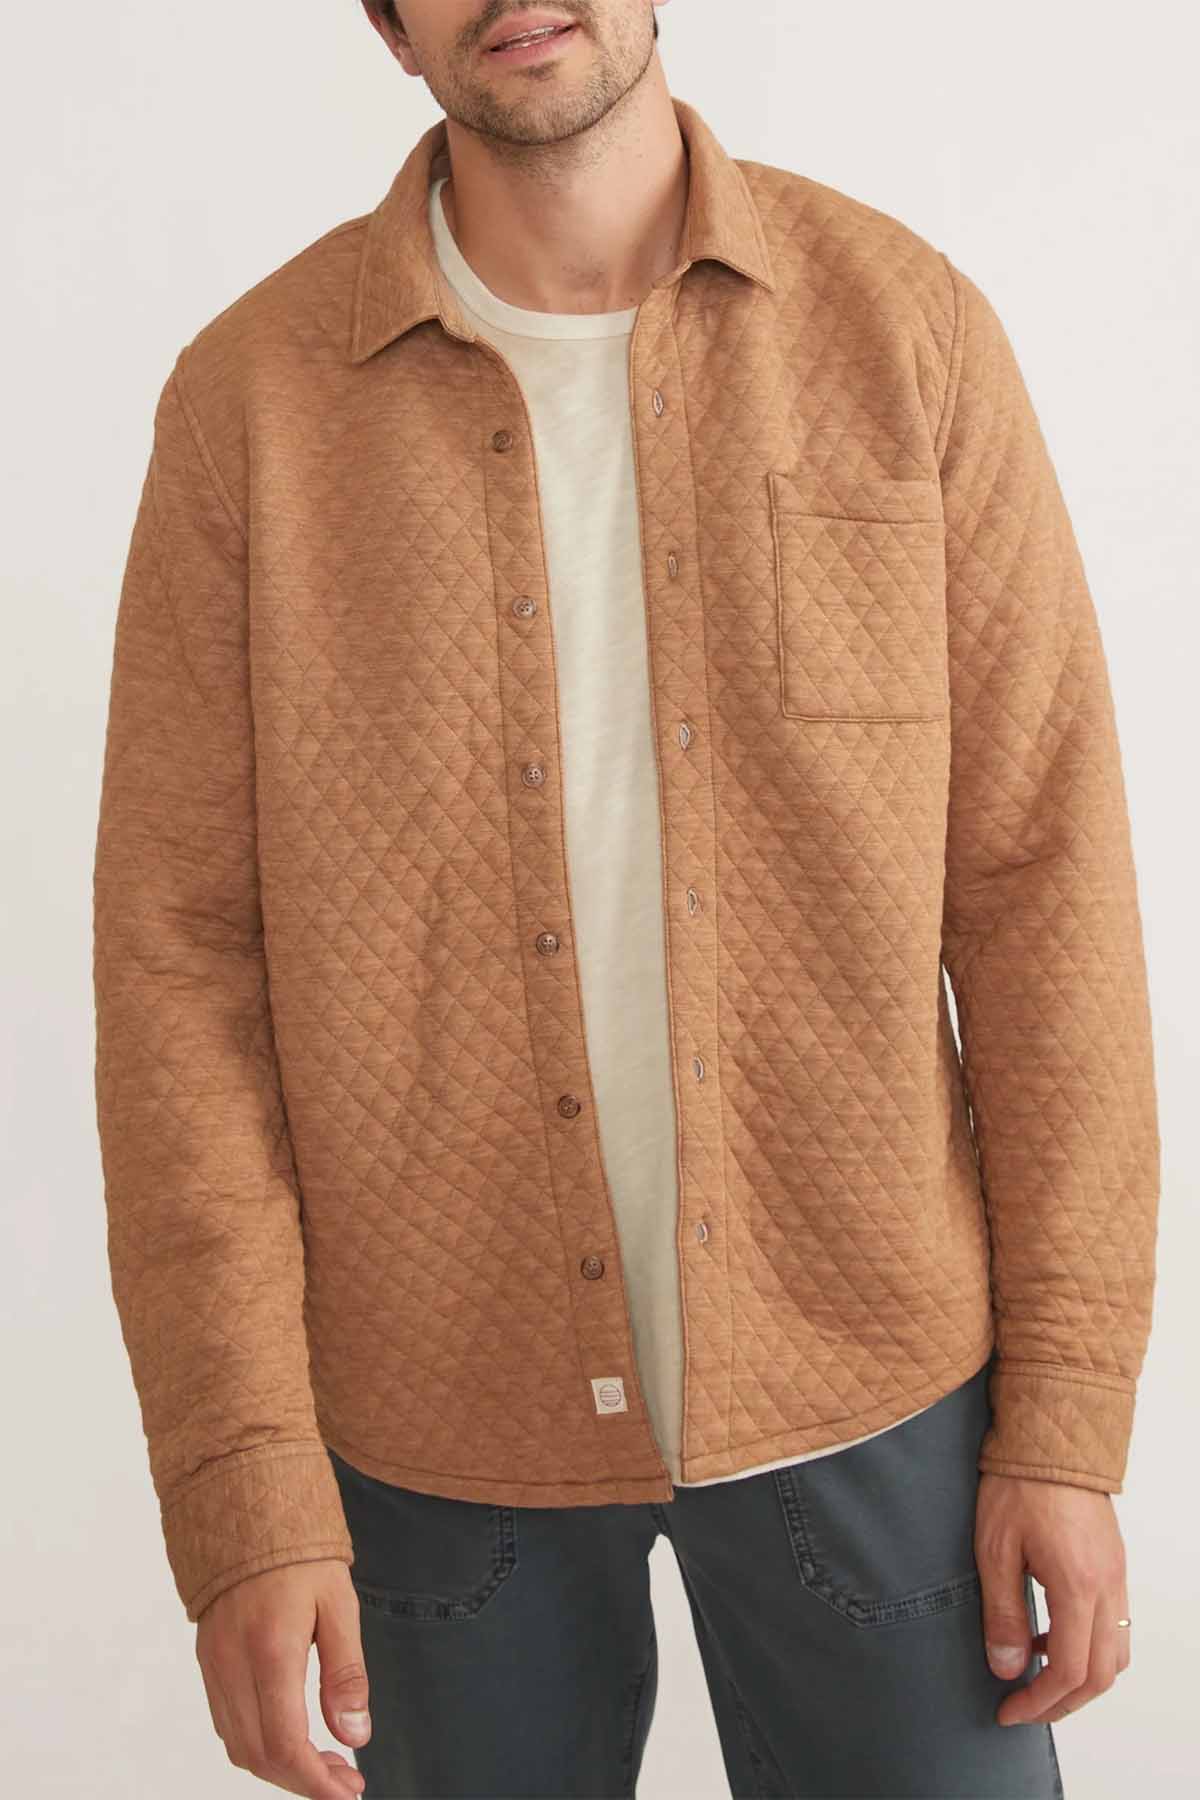 Marine Layer - Corbet Quilted Overshirt - Camel - Front